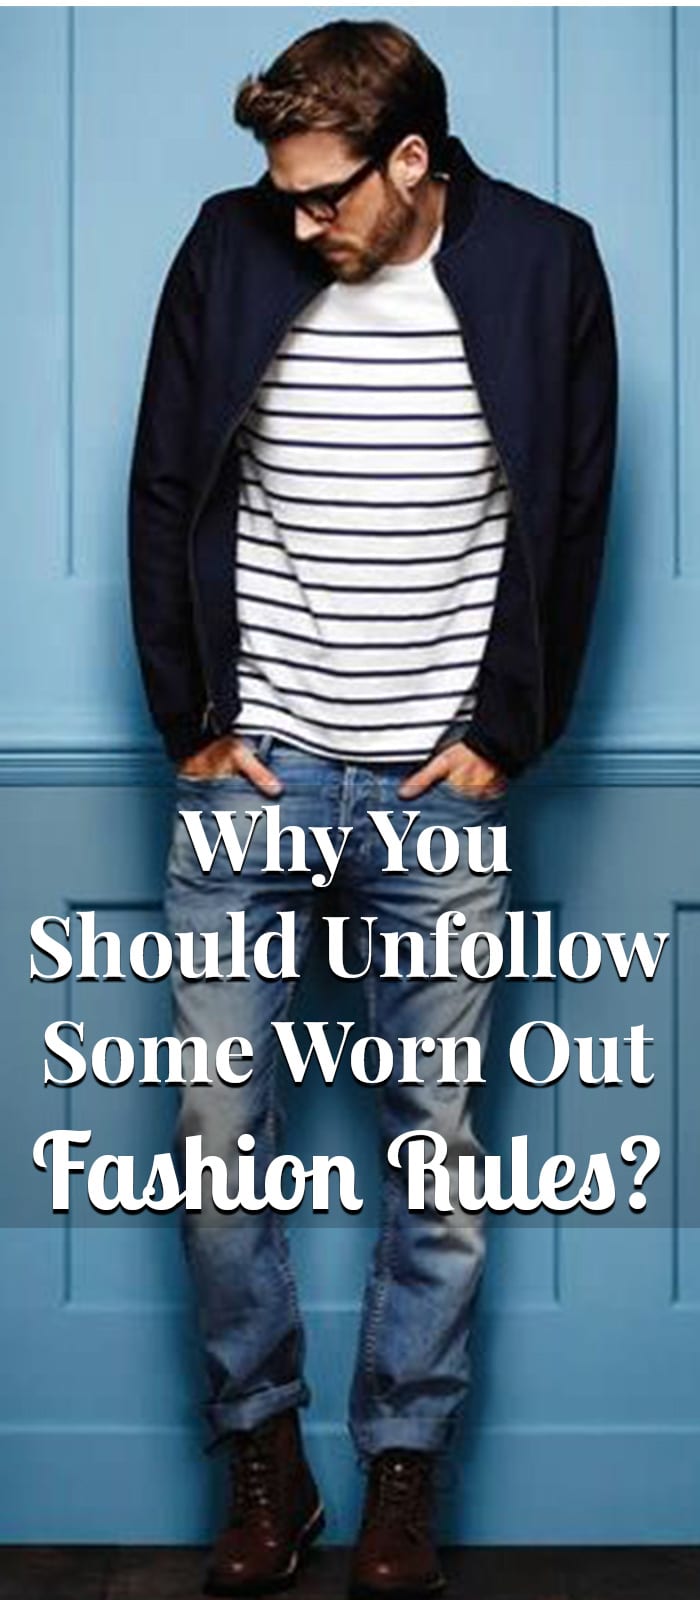 Why You Should Unfollow Some Worn Out Fashion Rules